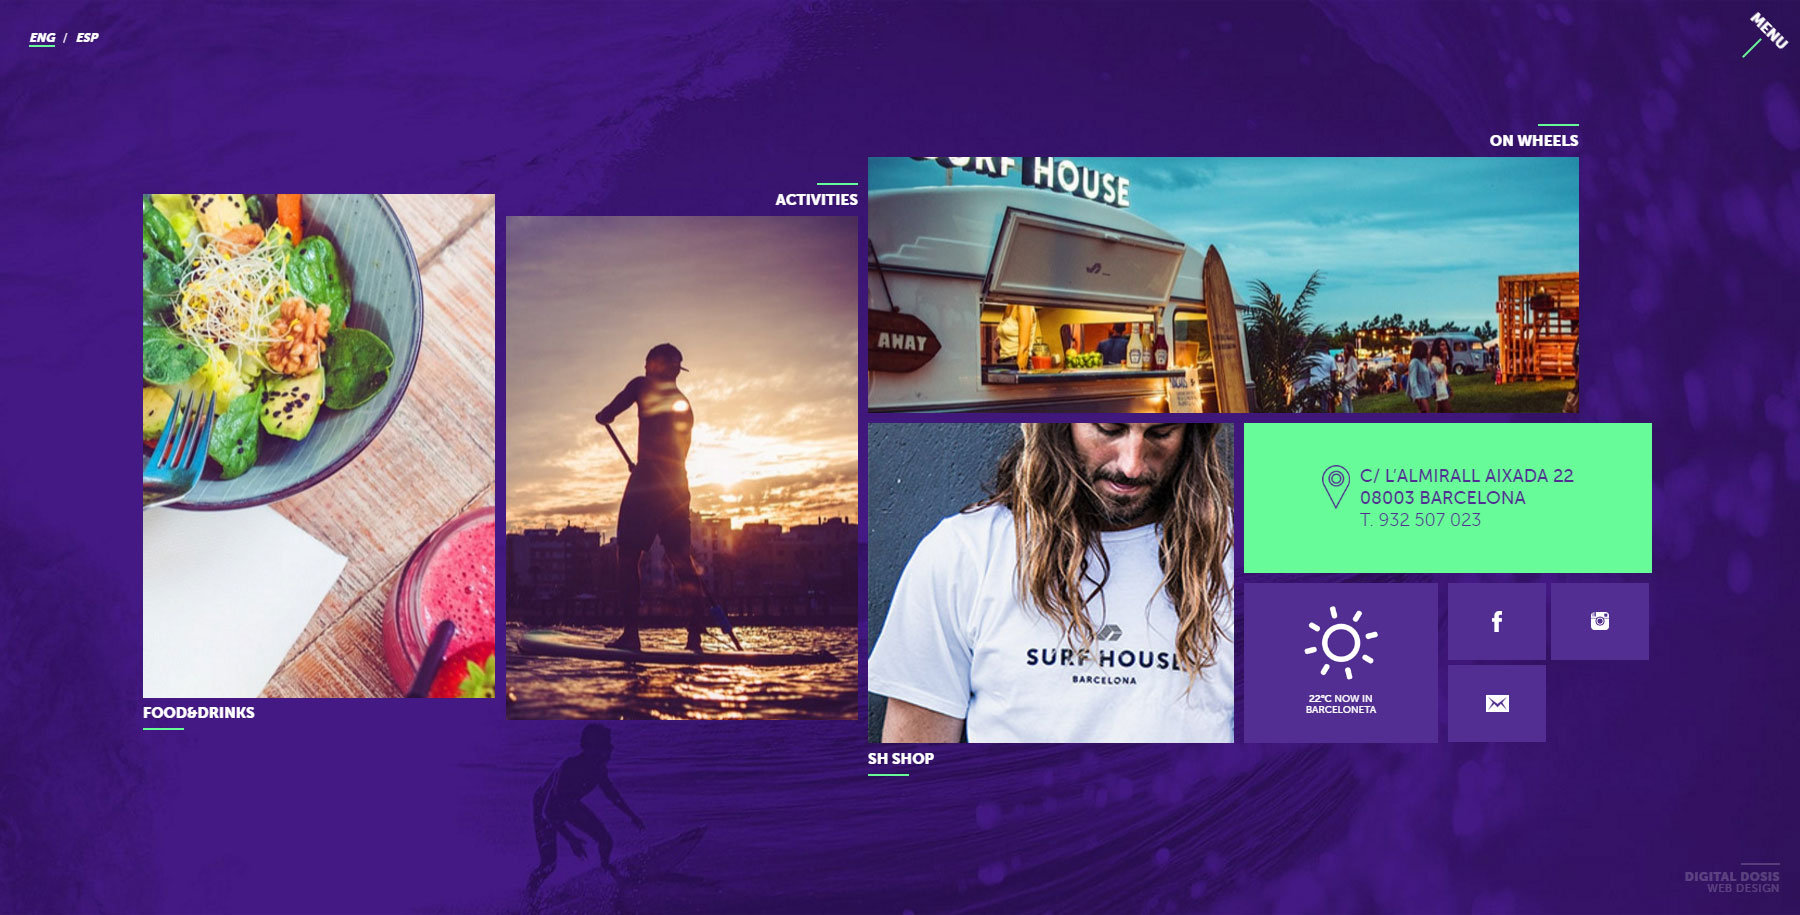 Surf House Barcelona - Website of the Day